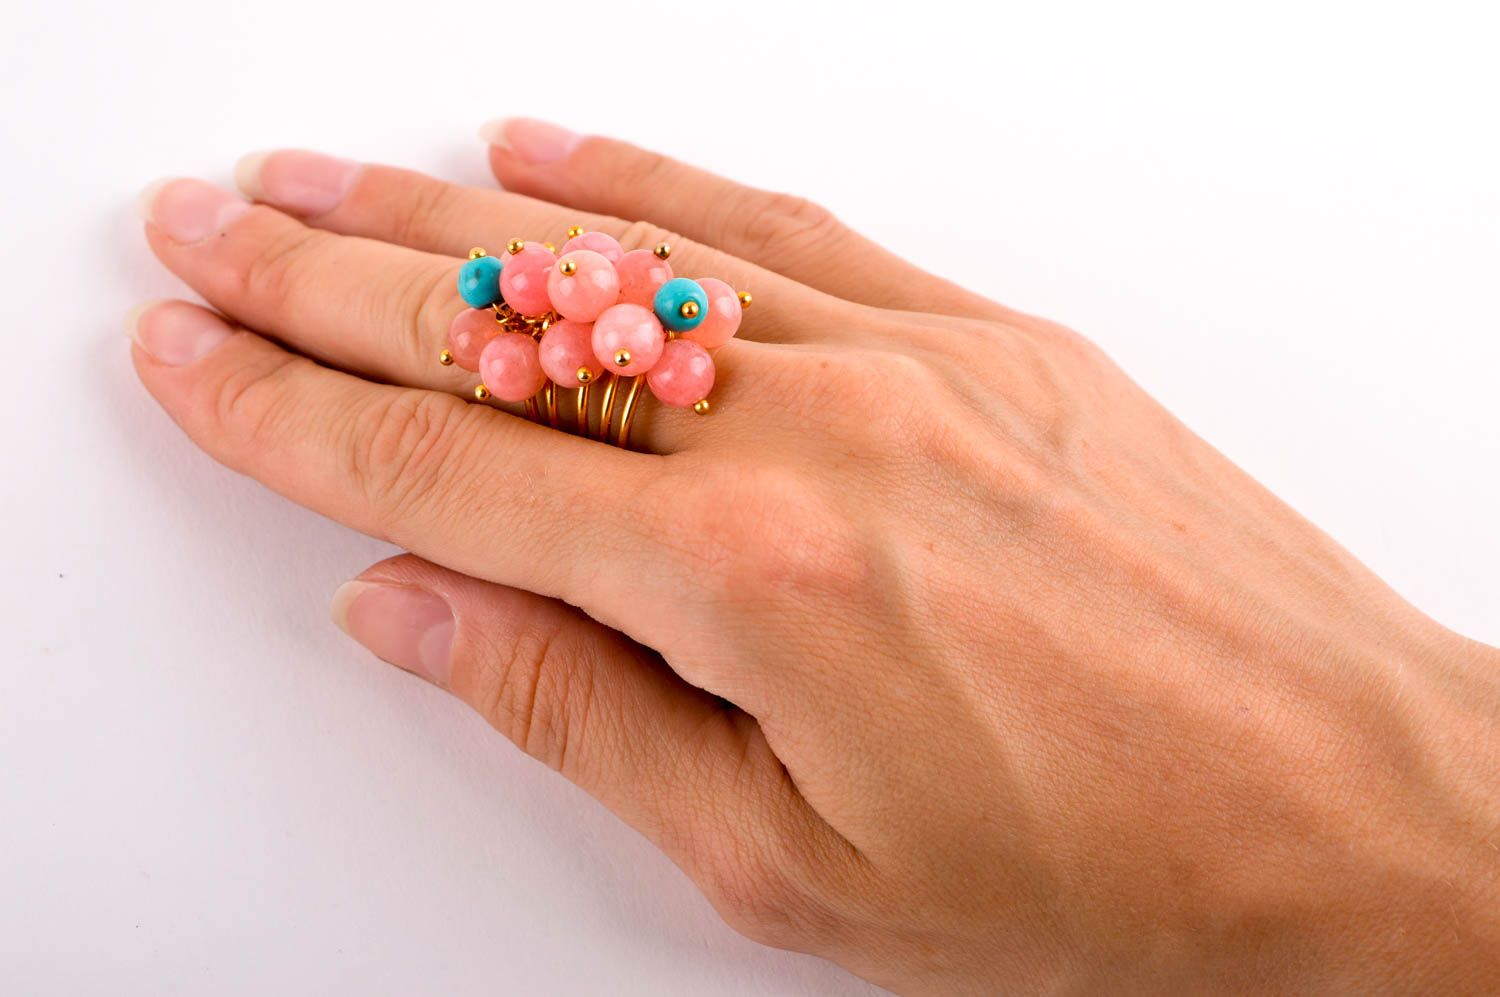 Handmade ring designer ring with stones unusual accessory gift for women photo 5